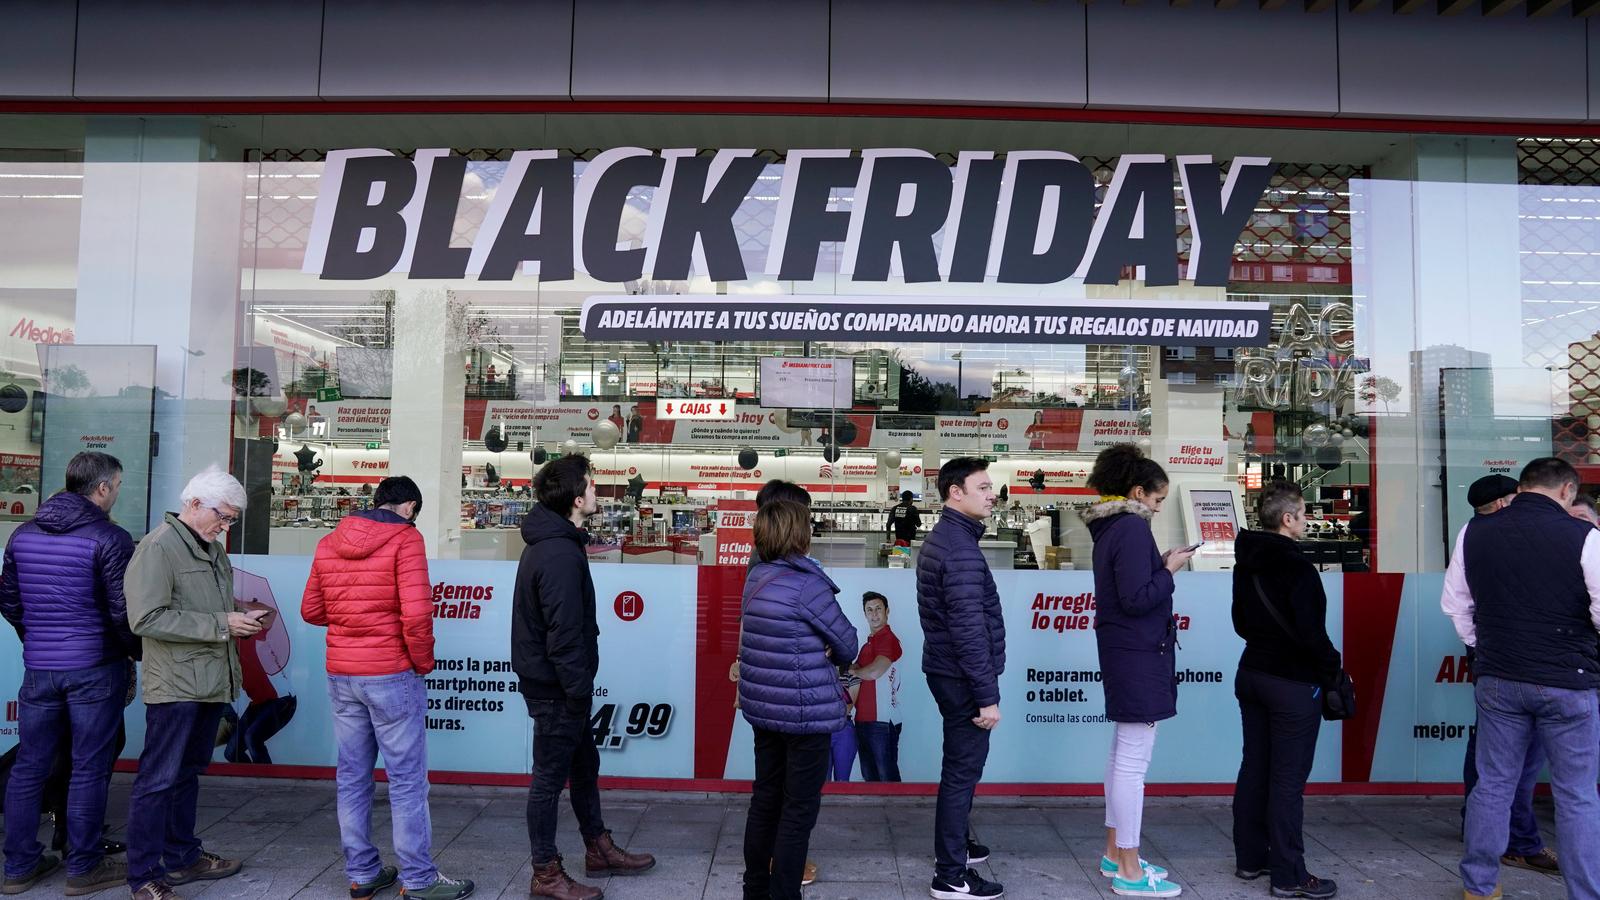 Shoppers wait in long lines in front of a storefront window that reads "Black Friday" in black and white letters.